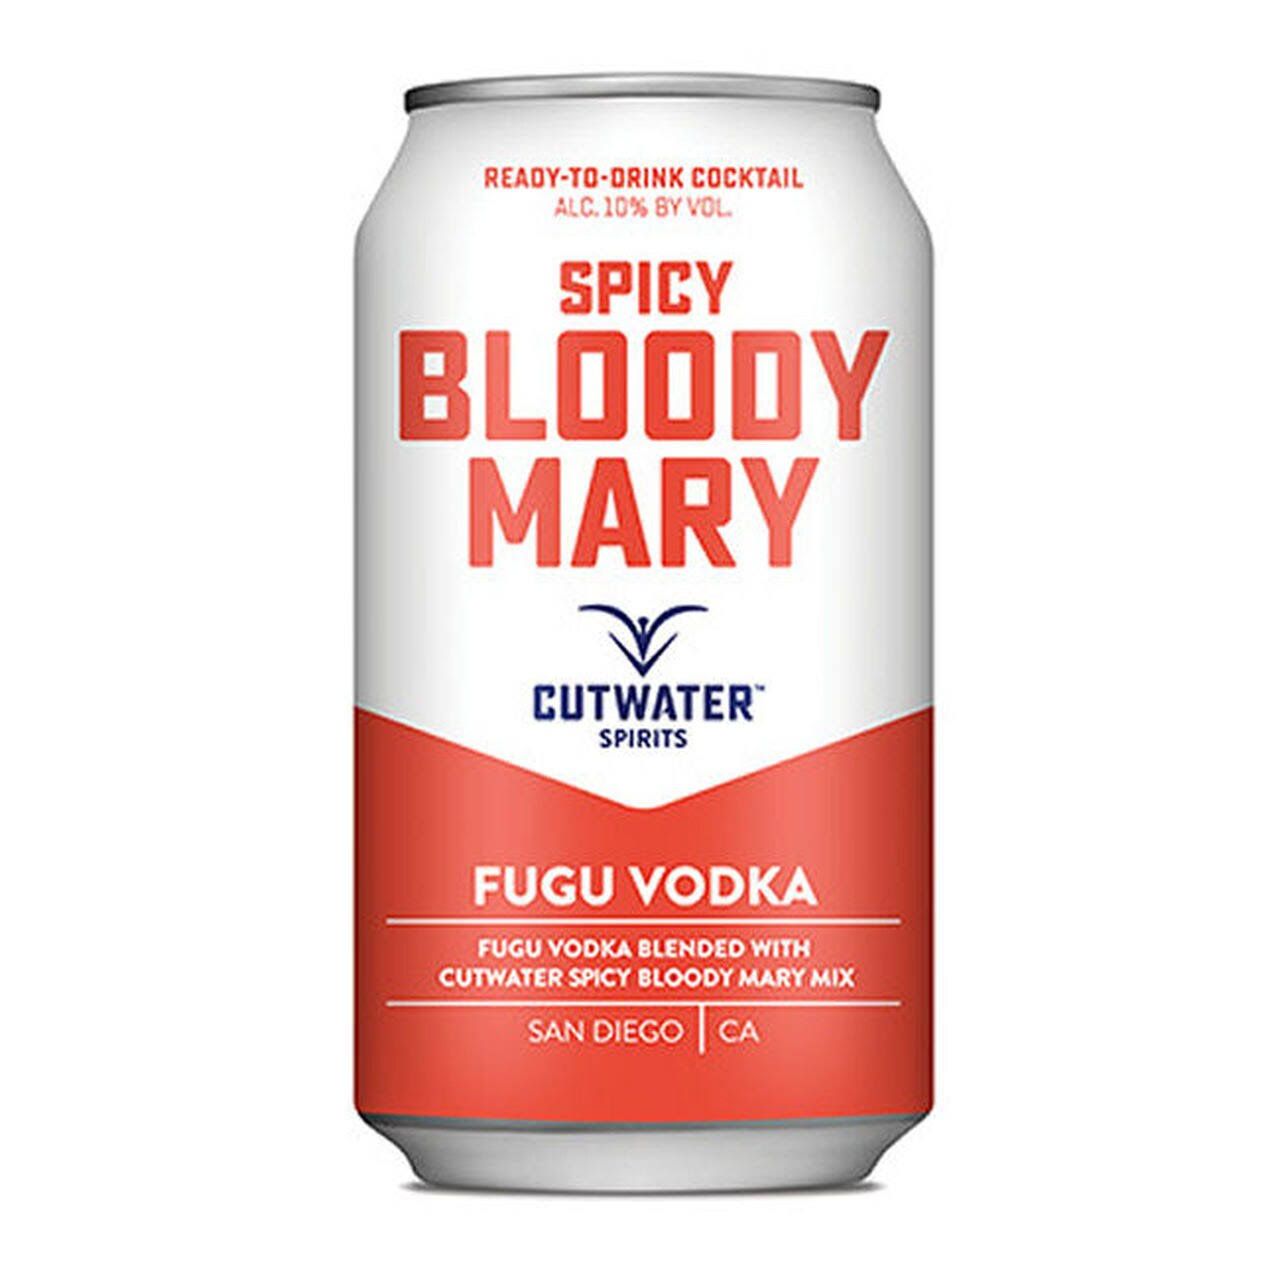 Cutwater Spirits Fugu Bloody Mary, Spicy - 4 pack, 12 oz cans